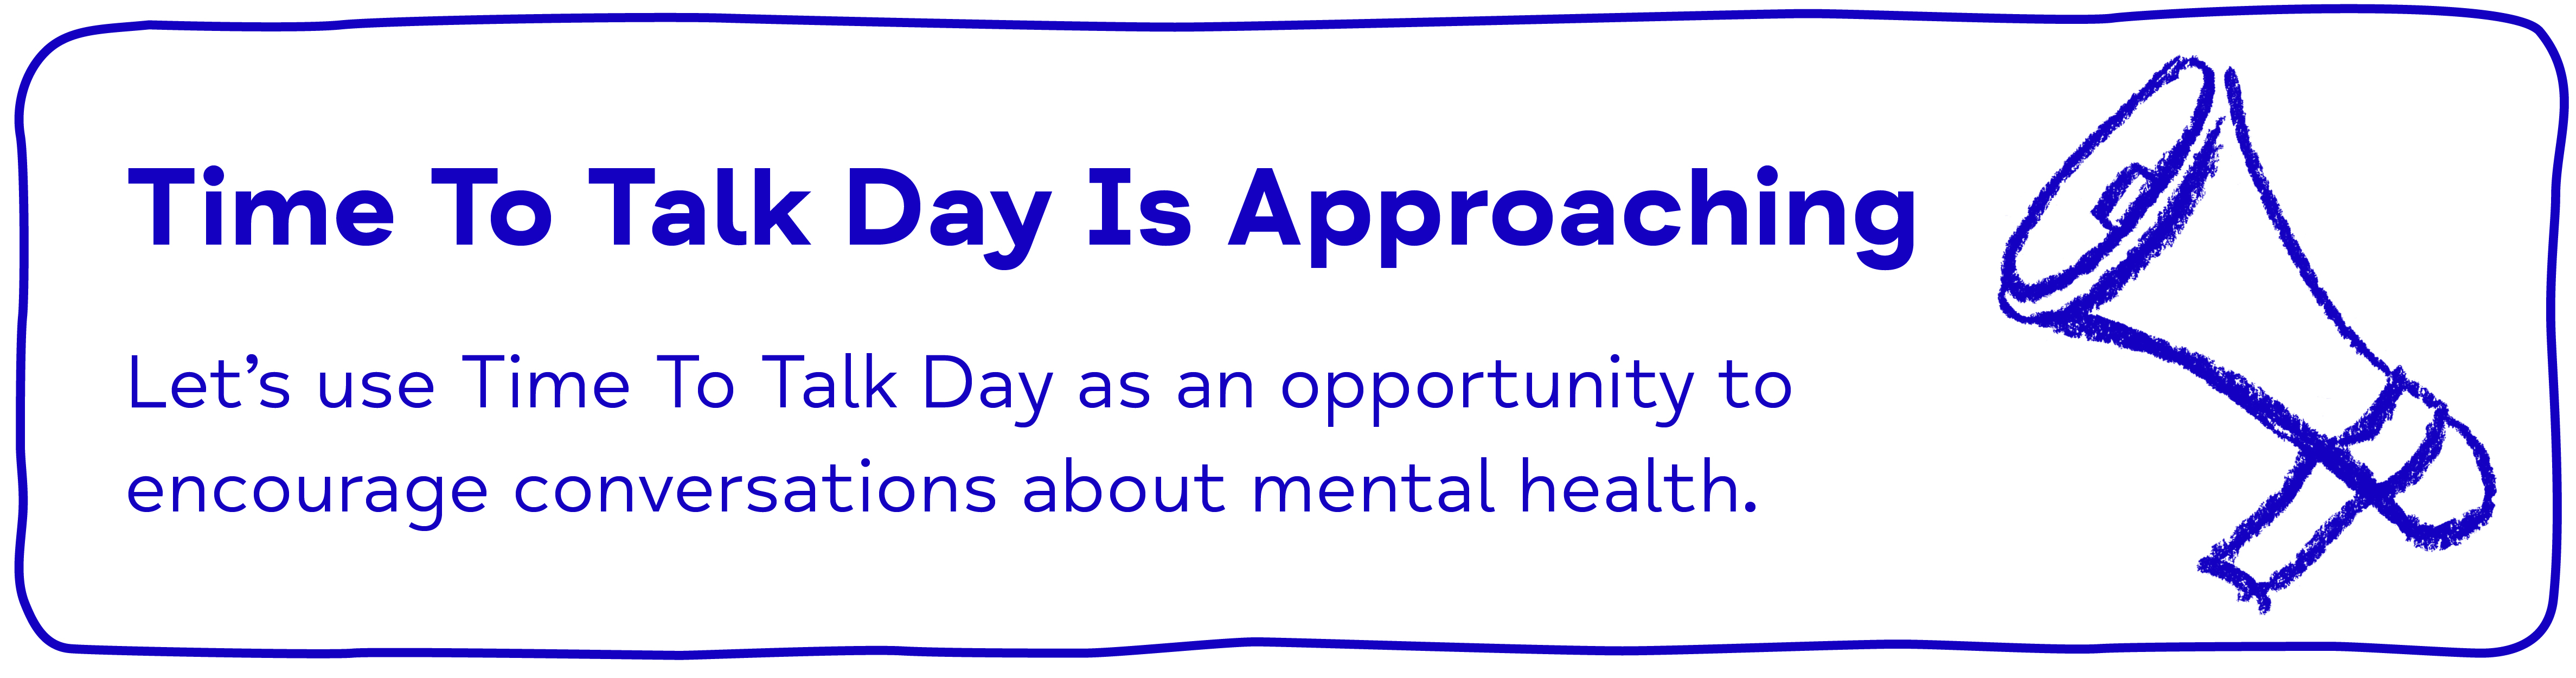 Time To Talk Day Is Approaching - Let's use Time To Talk Day as an opportunity to encourage conversations about mental health.